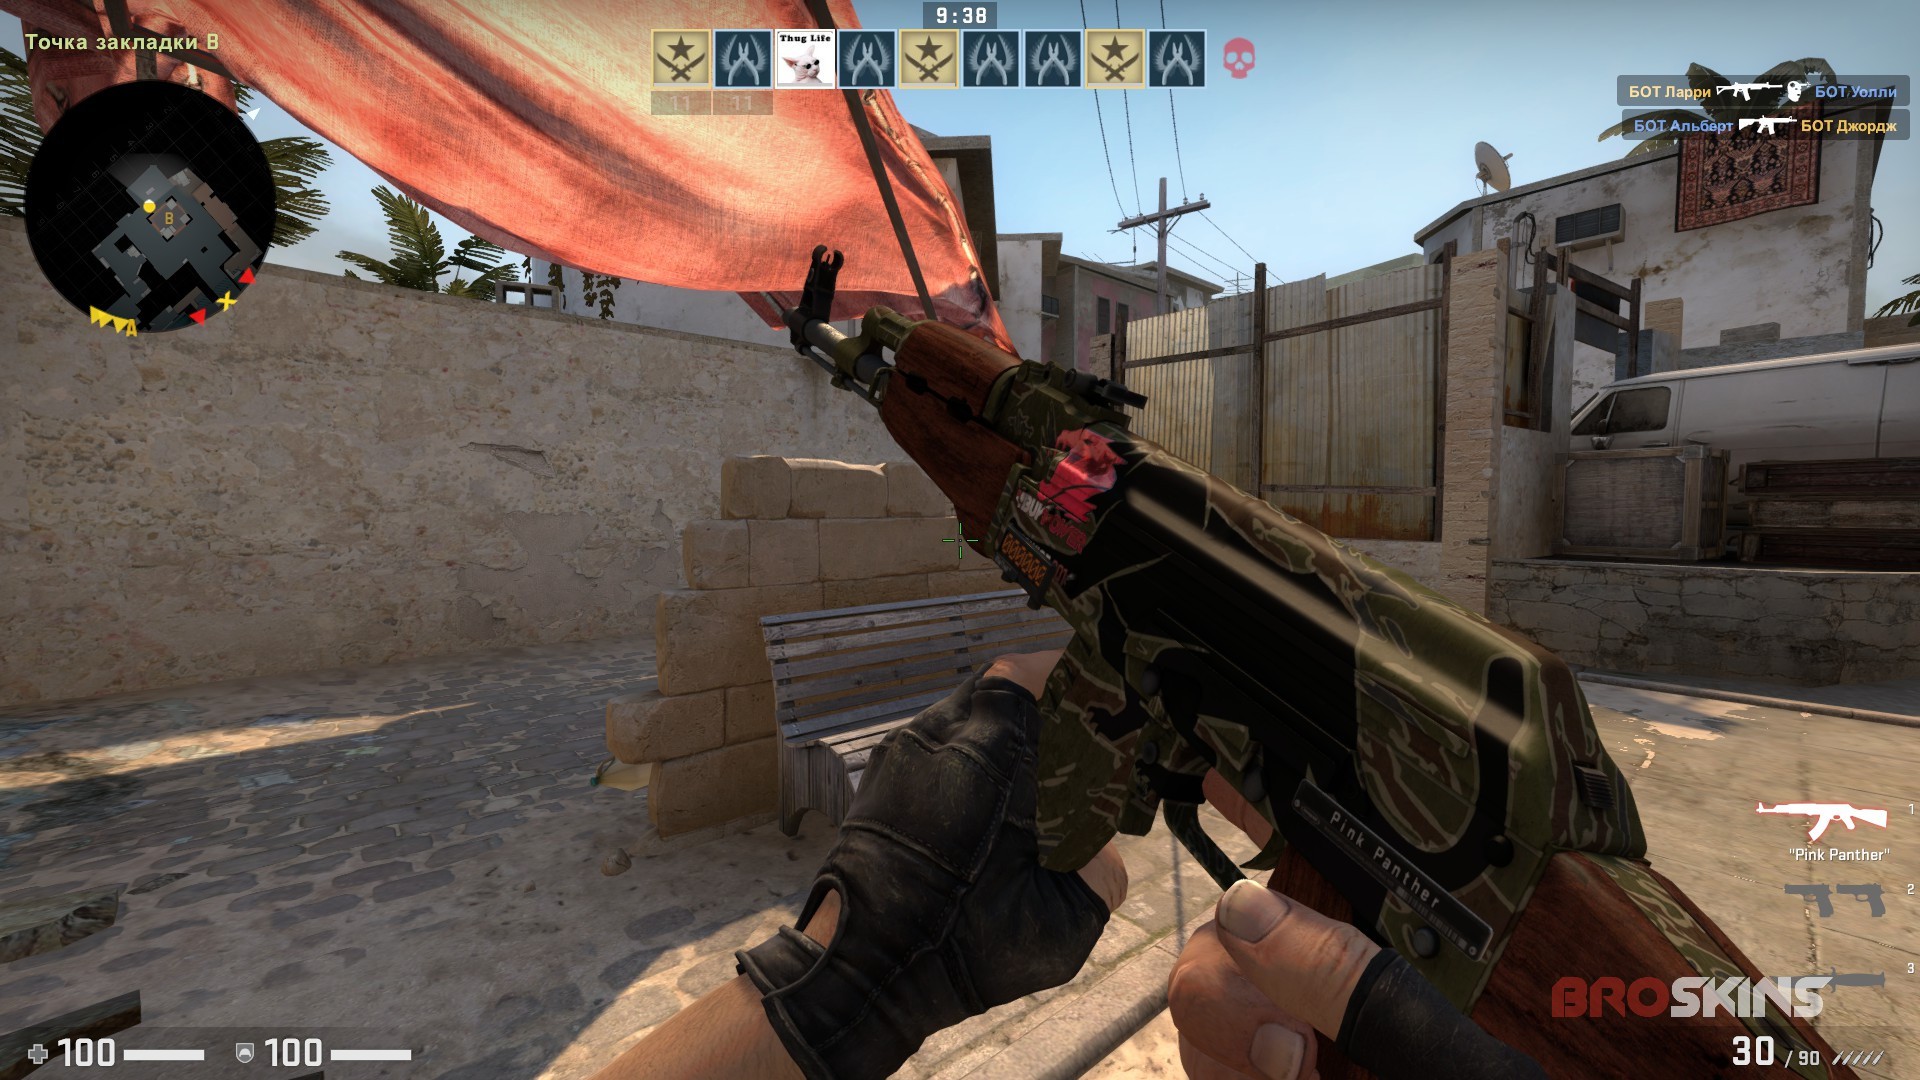 ST FN jaguar with IBP holo on head